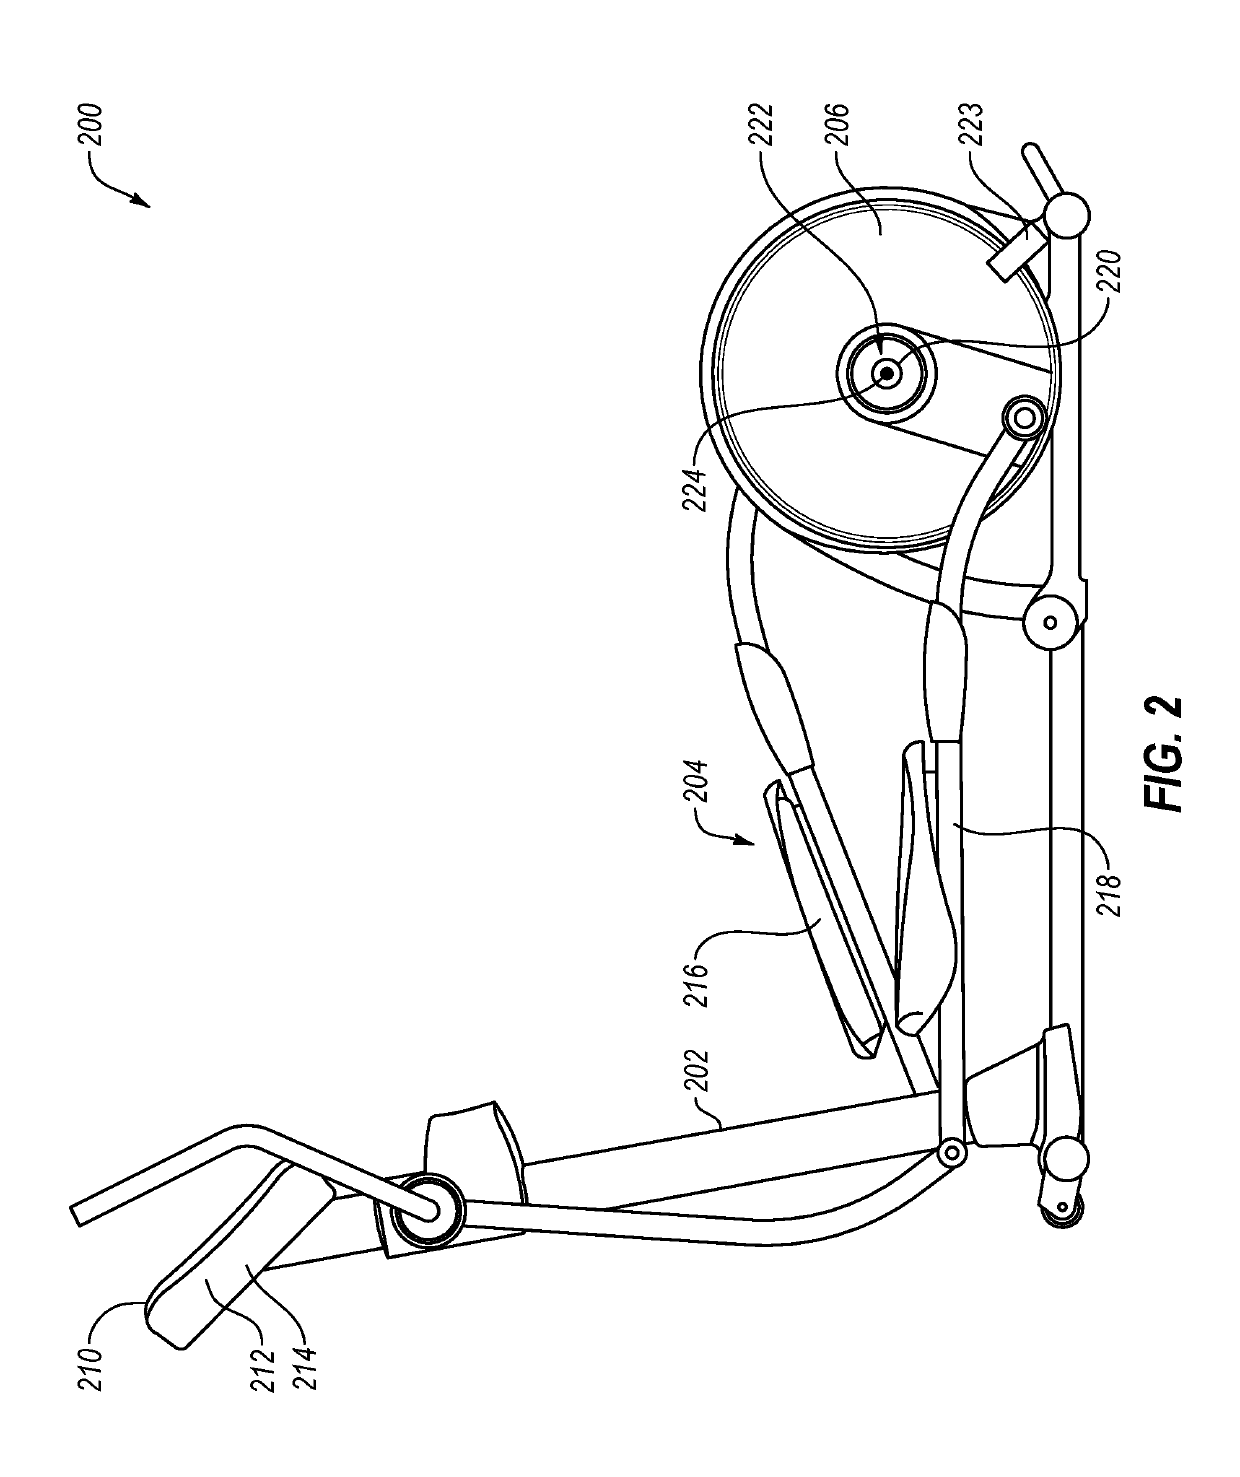 Systems and methods for selectively rotationally fixing a pedaled drivetrain